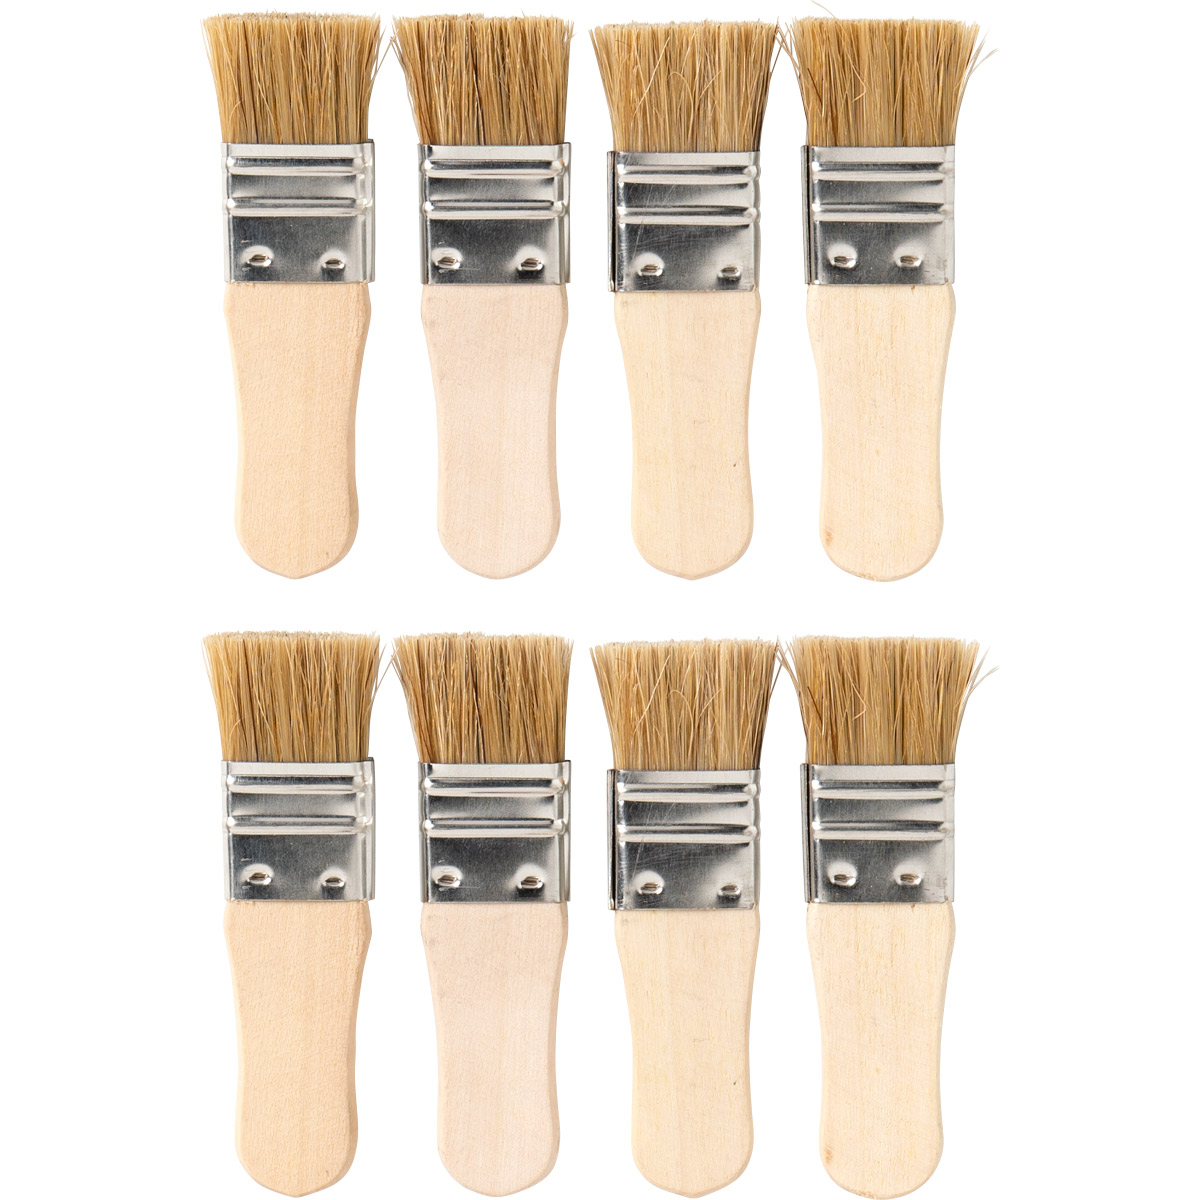 Staccato Short Handle Brushes, Set of 8 w/ Easel Case - Assorted Sizes